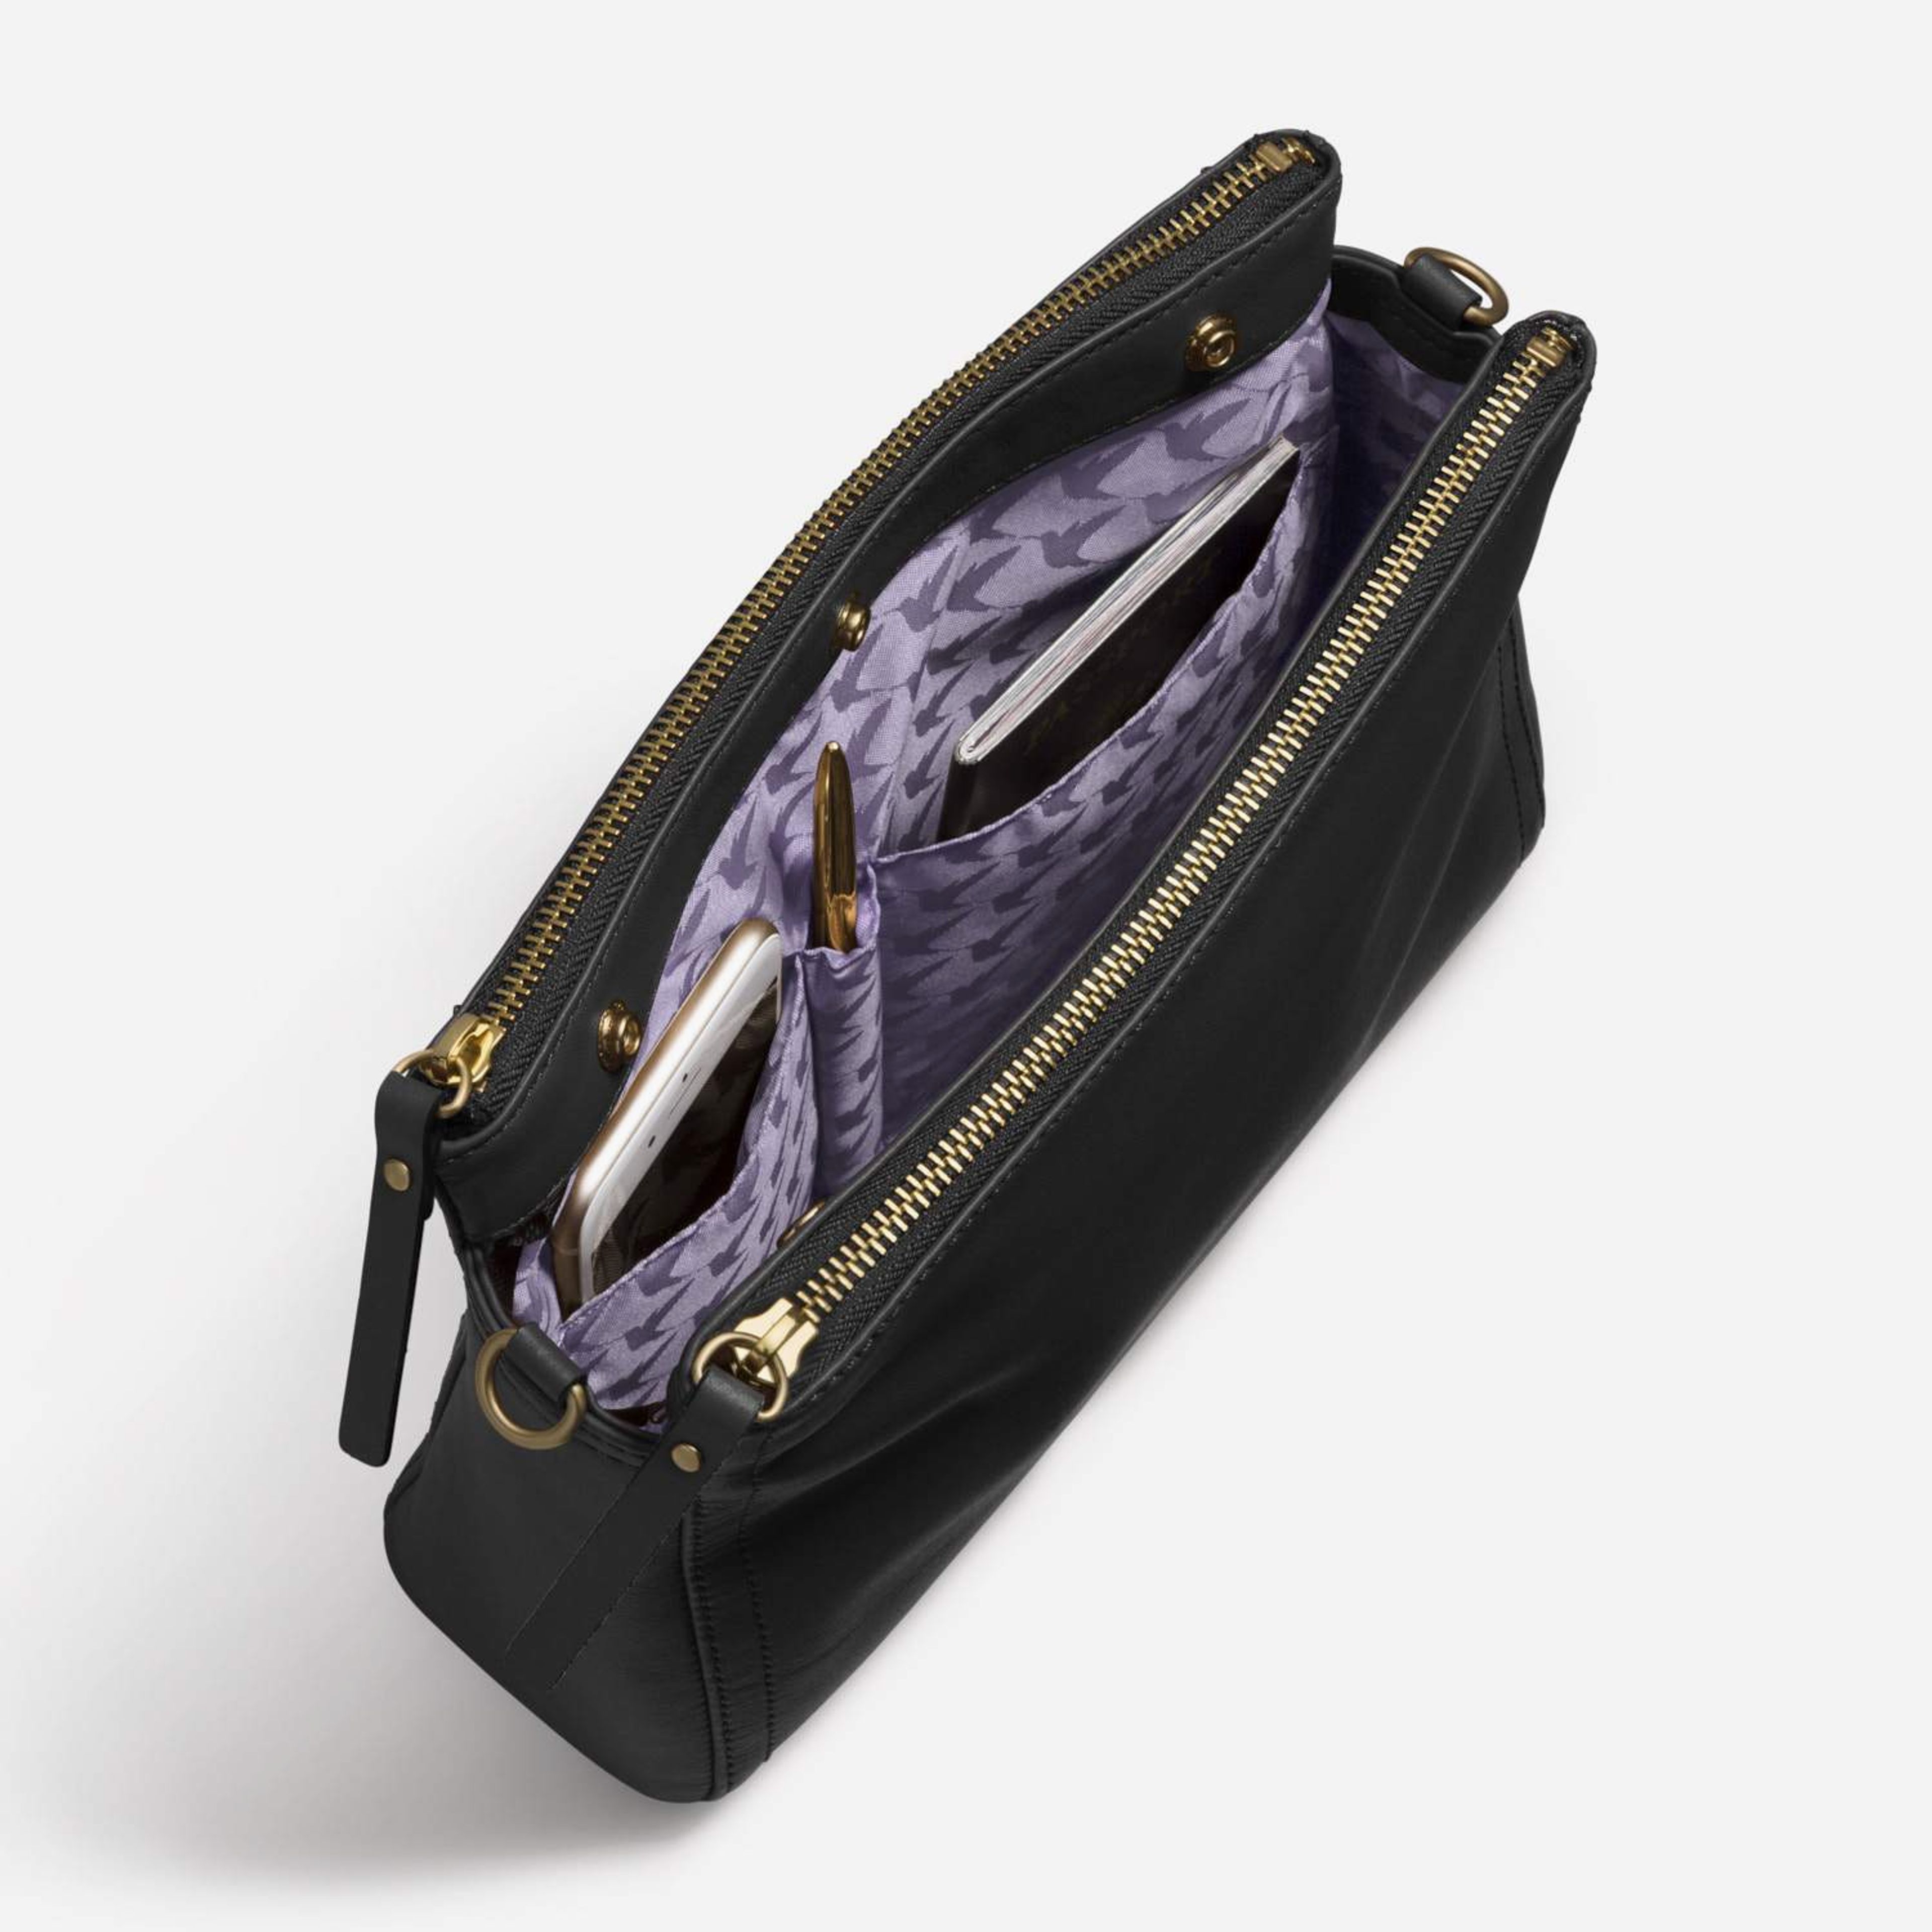 The Pearl - Nappa Leather - Black / Gold / Lavender